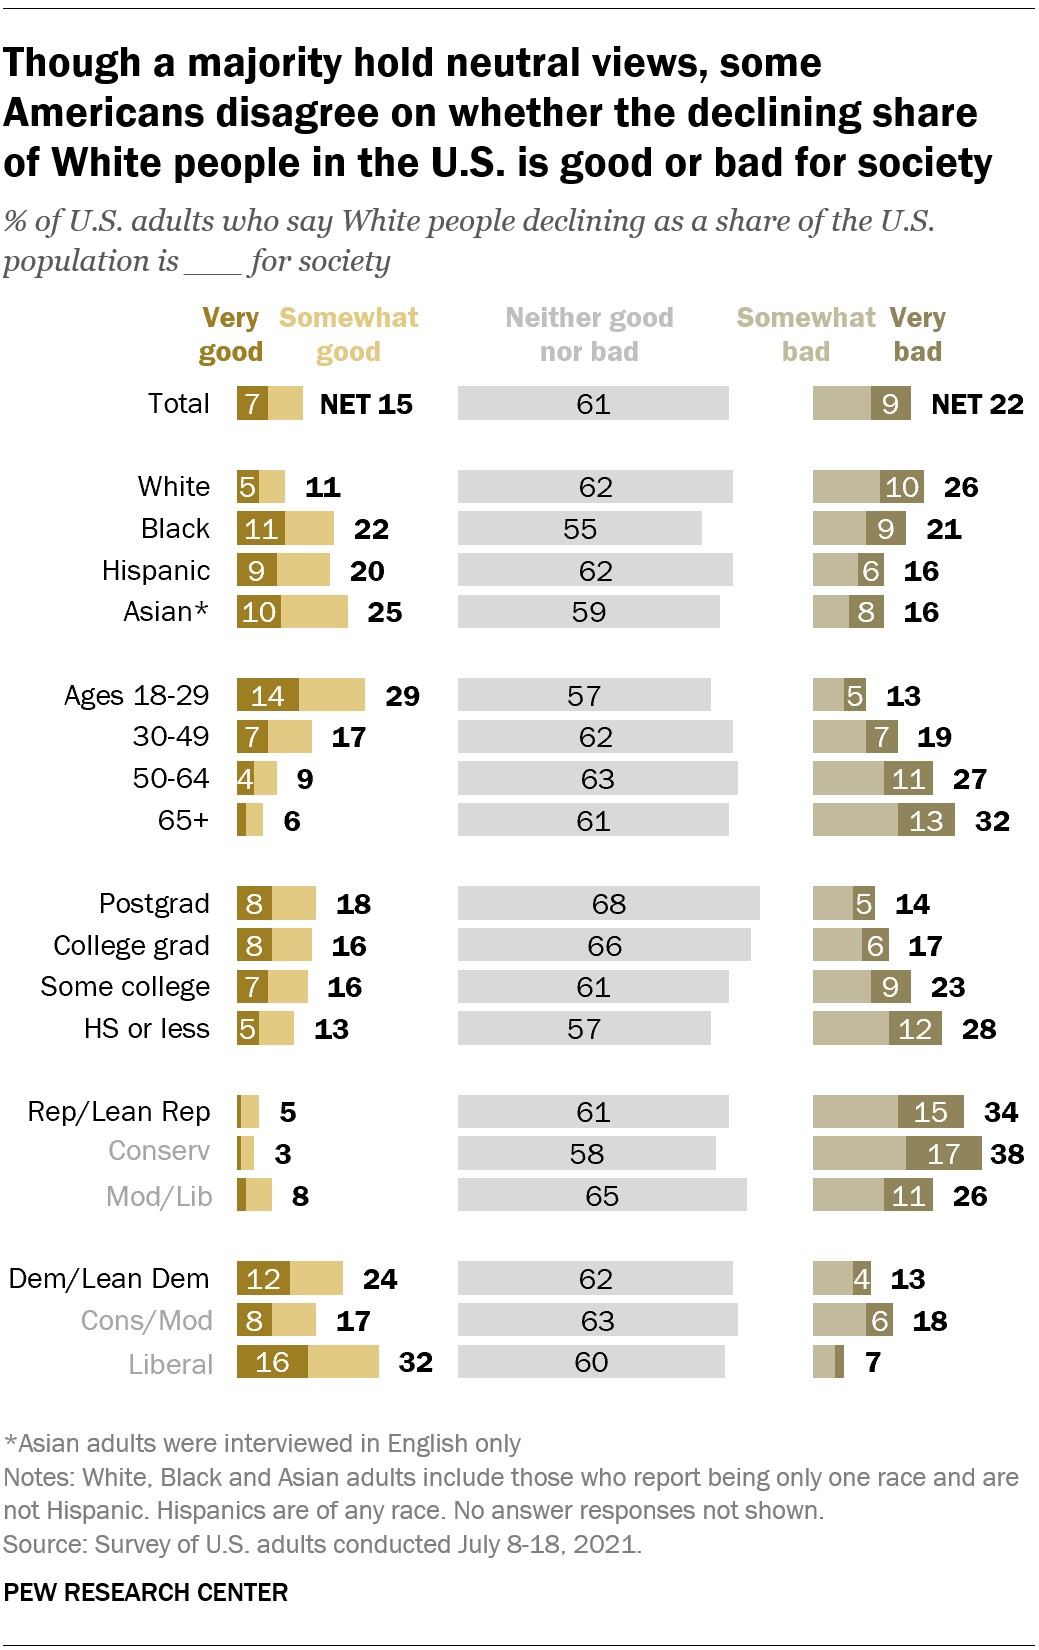 Most In Us Say Declining White Share Of Population Neither Good Nor Bad For Society Pew 0114